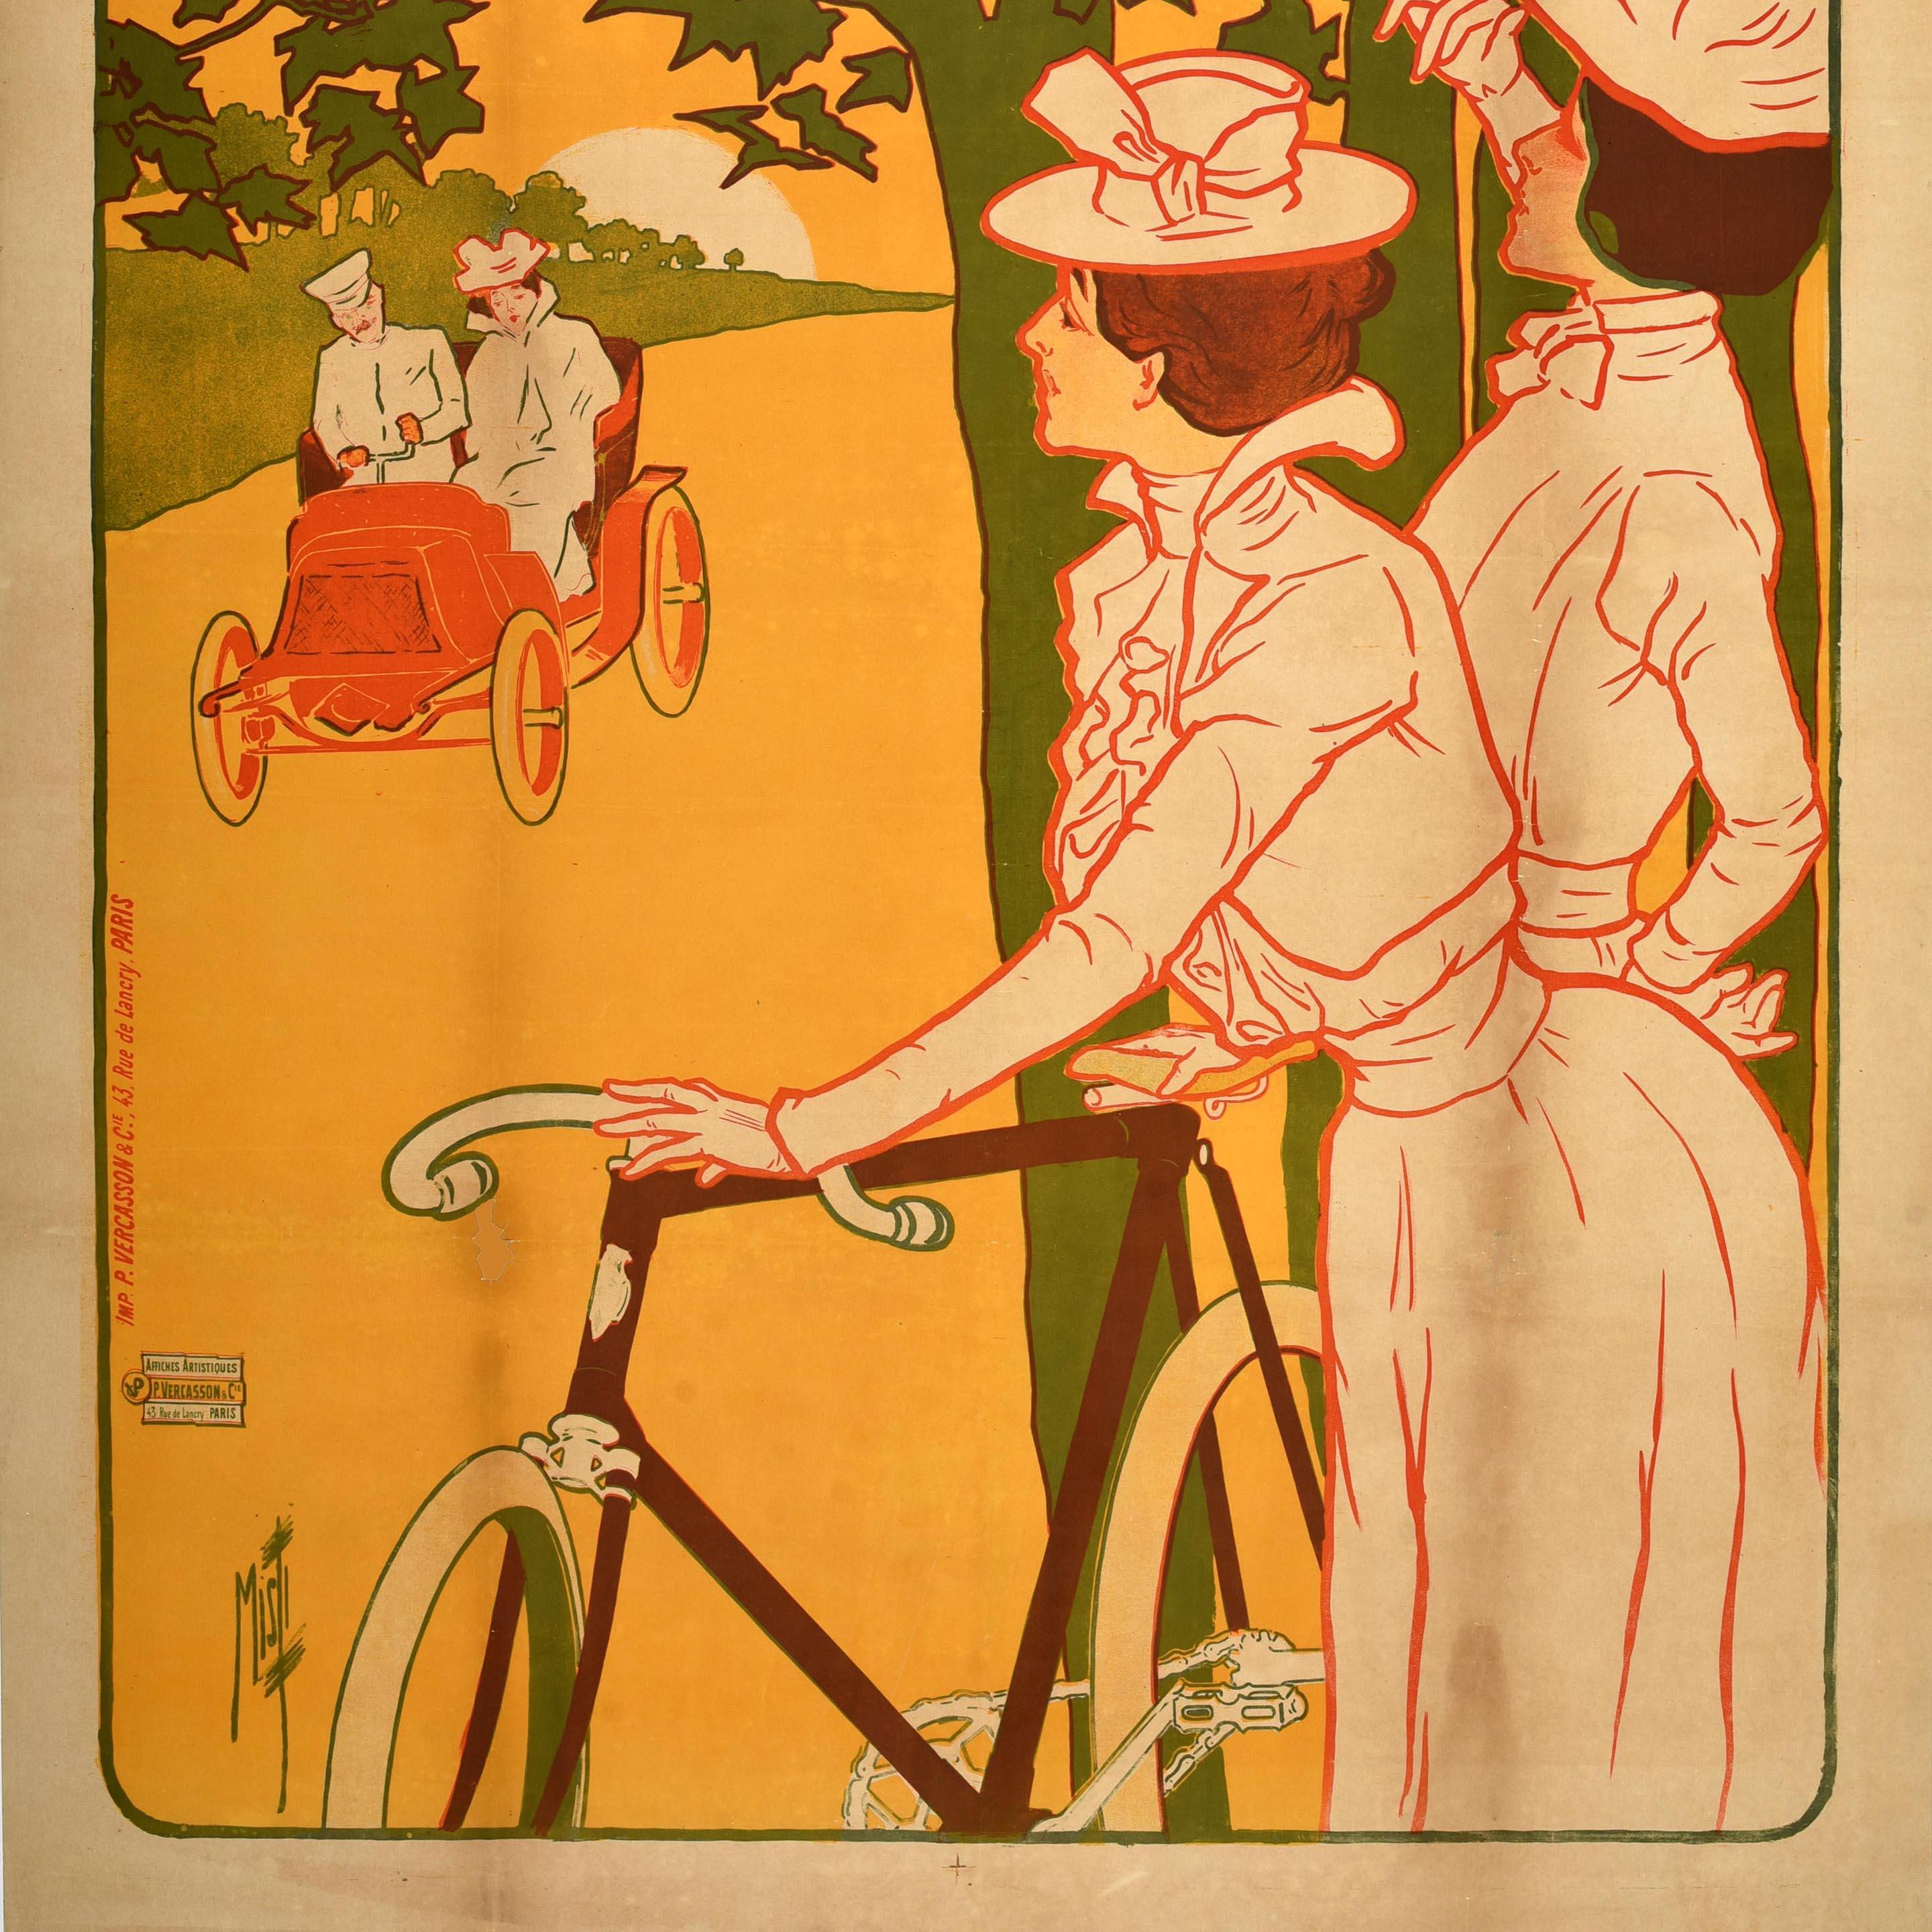 Original antique French advertising poster for Cottereau & Cie Dijon featuring Belle Epoque artwork by Misti (Ferdinand Mifliez; 1865-1923) of two ladies in fashionable dresses and hats standing with a bicycle by trees and looking at a couple